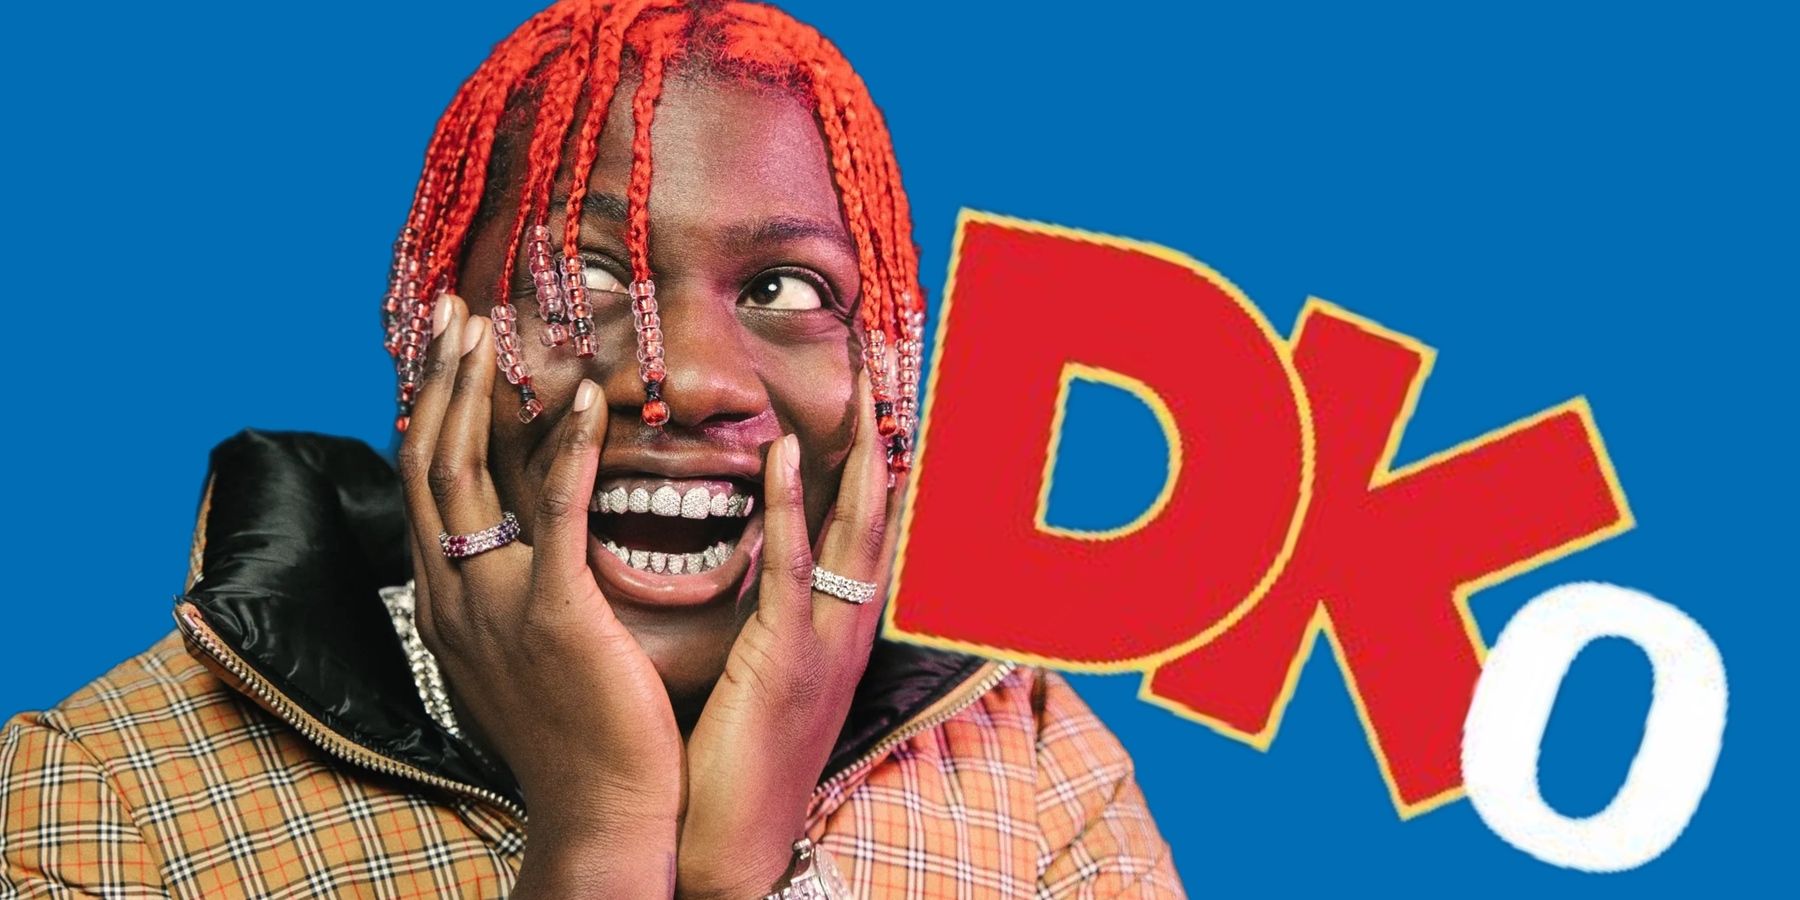 Lil Yachty Makes Big Gaming Purchase from Controversial Retro Games Store DKOldies